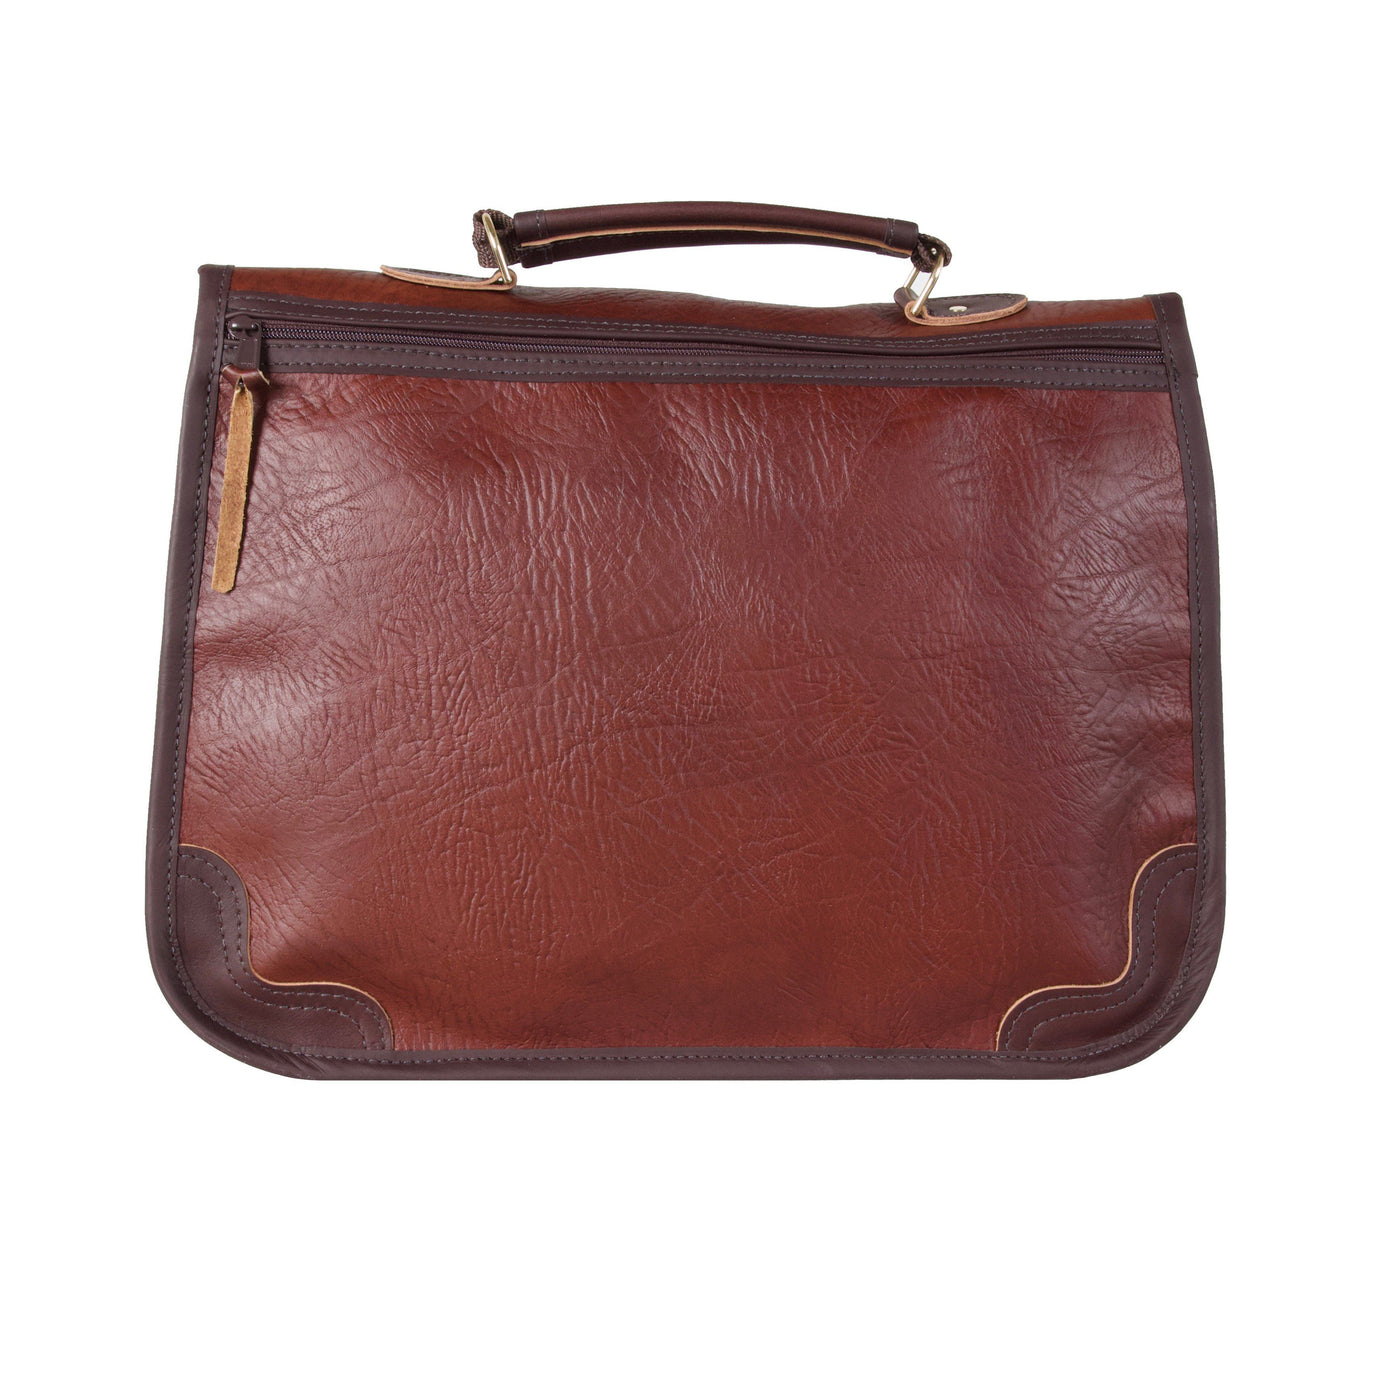 Bison Leather Executive Briefcase Bag The Buffalo Wool Co. 